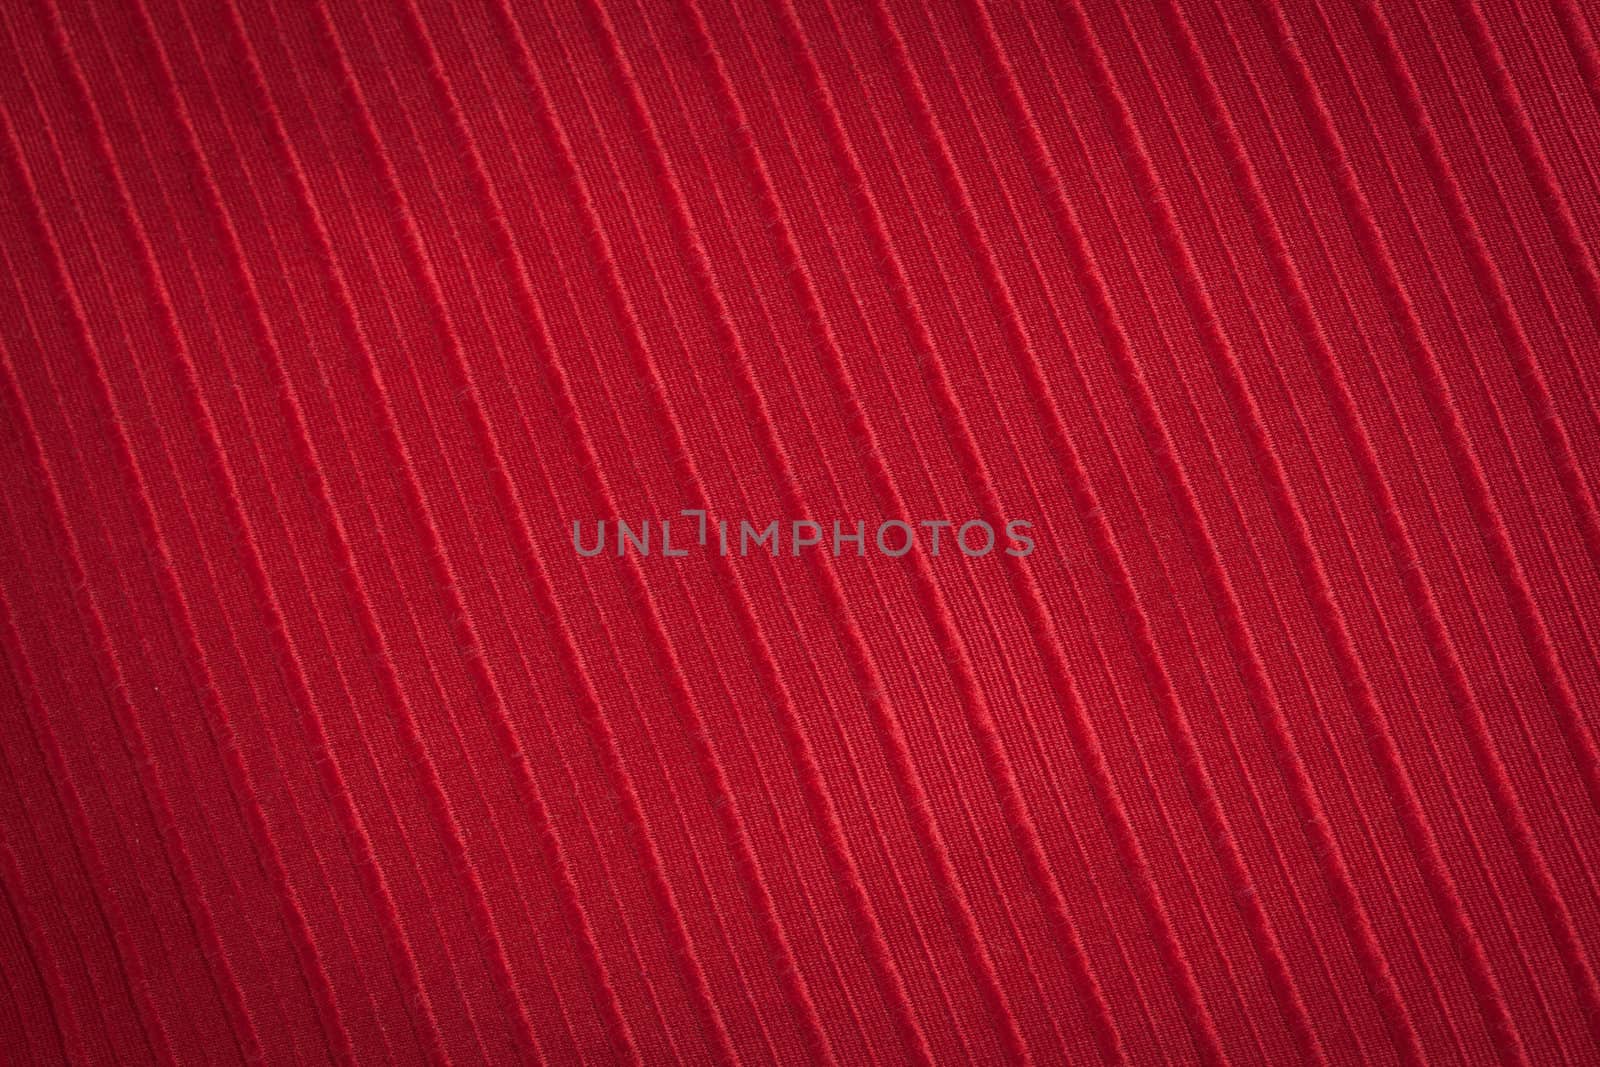 Red striped texture and background close-up